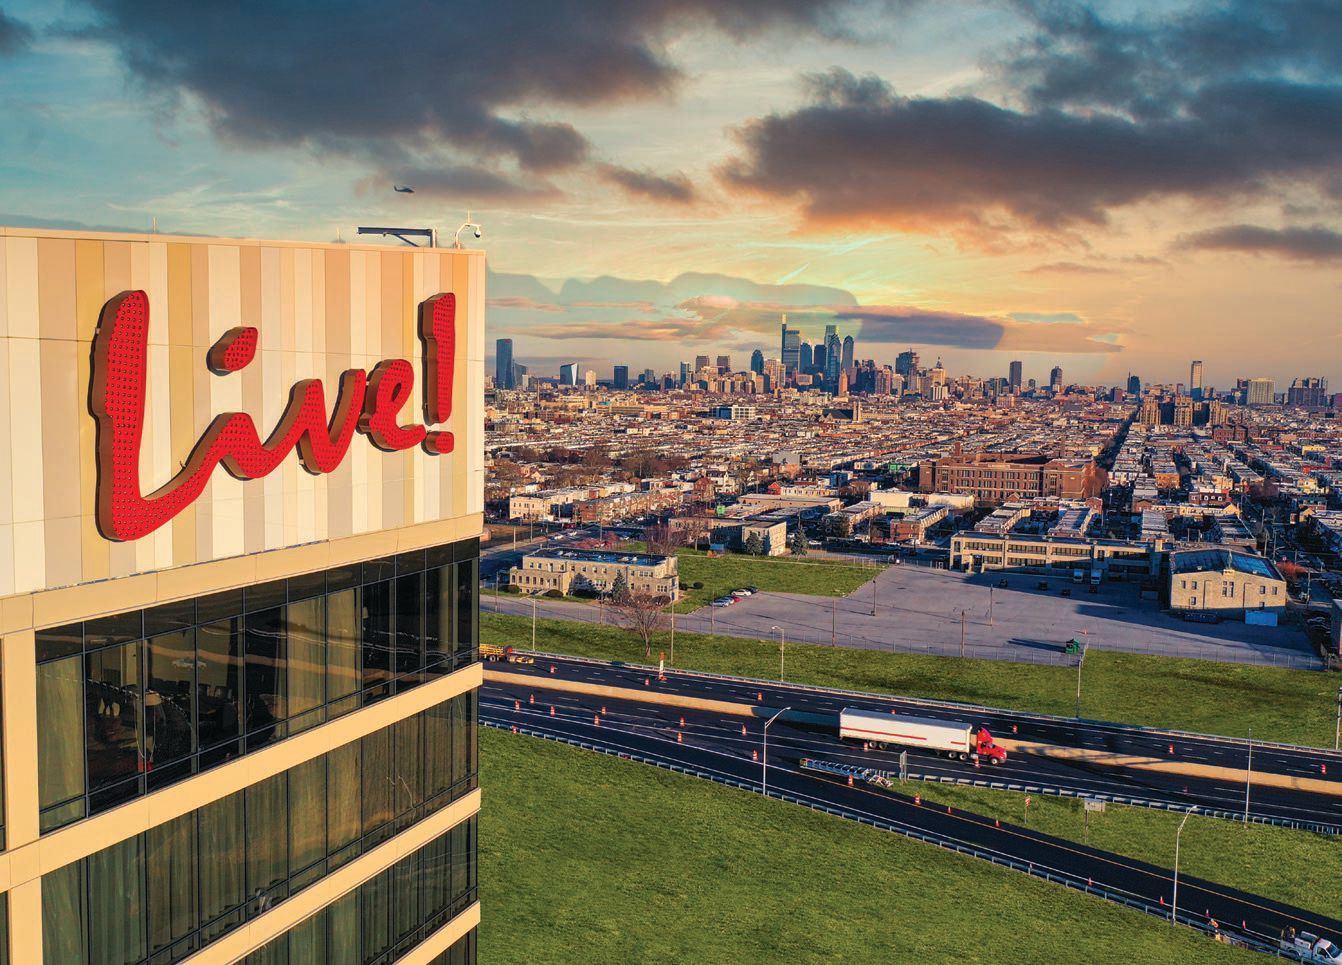 Live! Casino & Hotel Philadelphia is conveniently situated in South Philadelphia East. PHOTO COURTESY OF LIVE! CASINO & HOTEL PHILADELPHIA